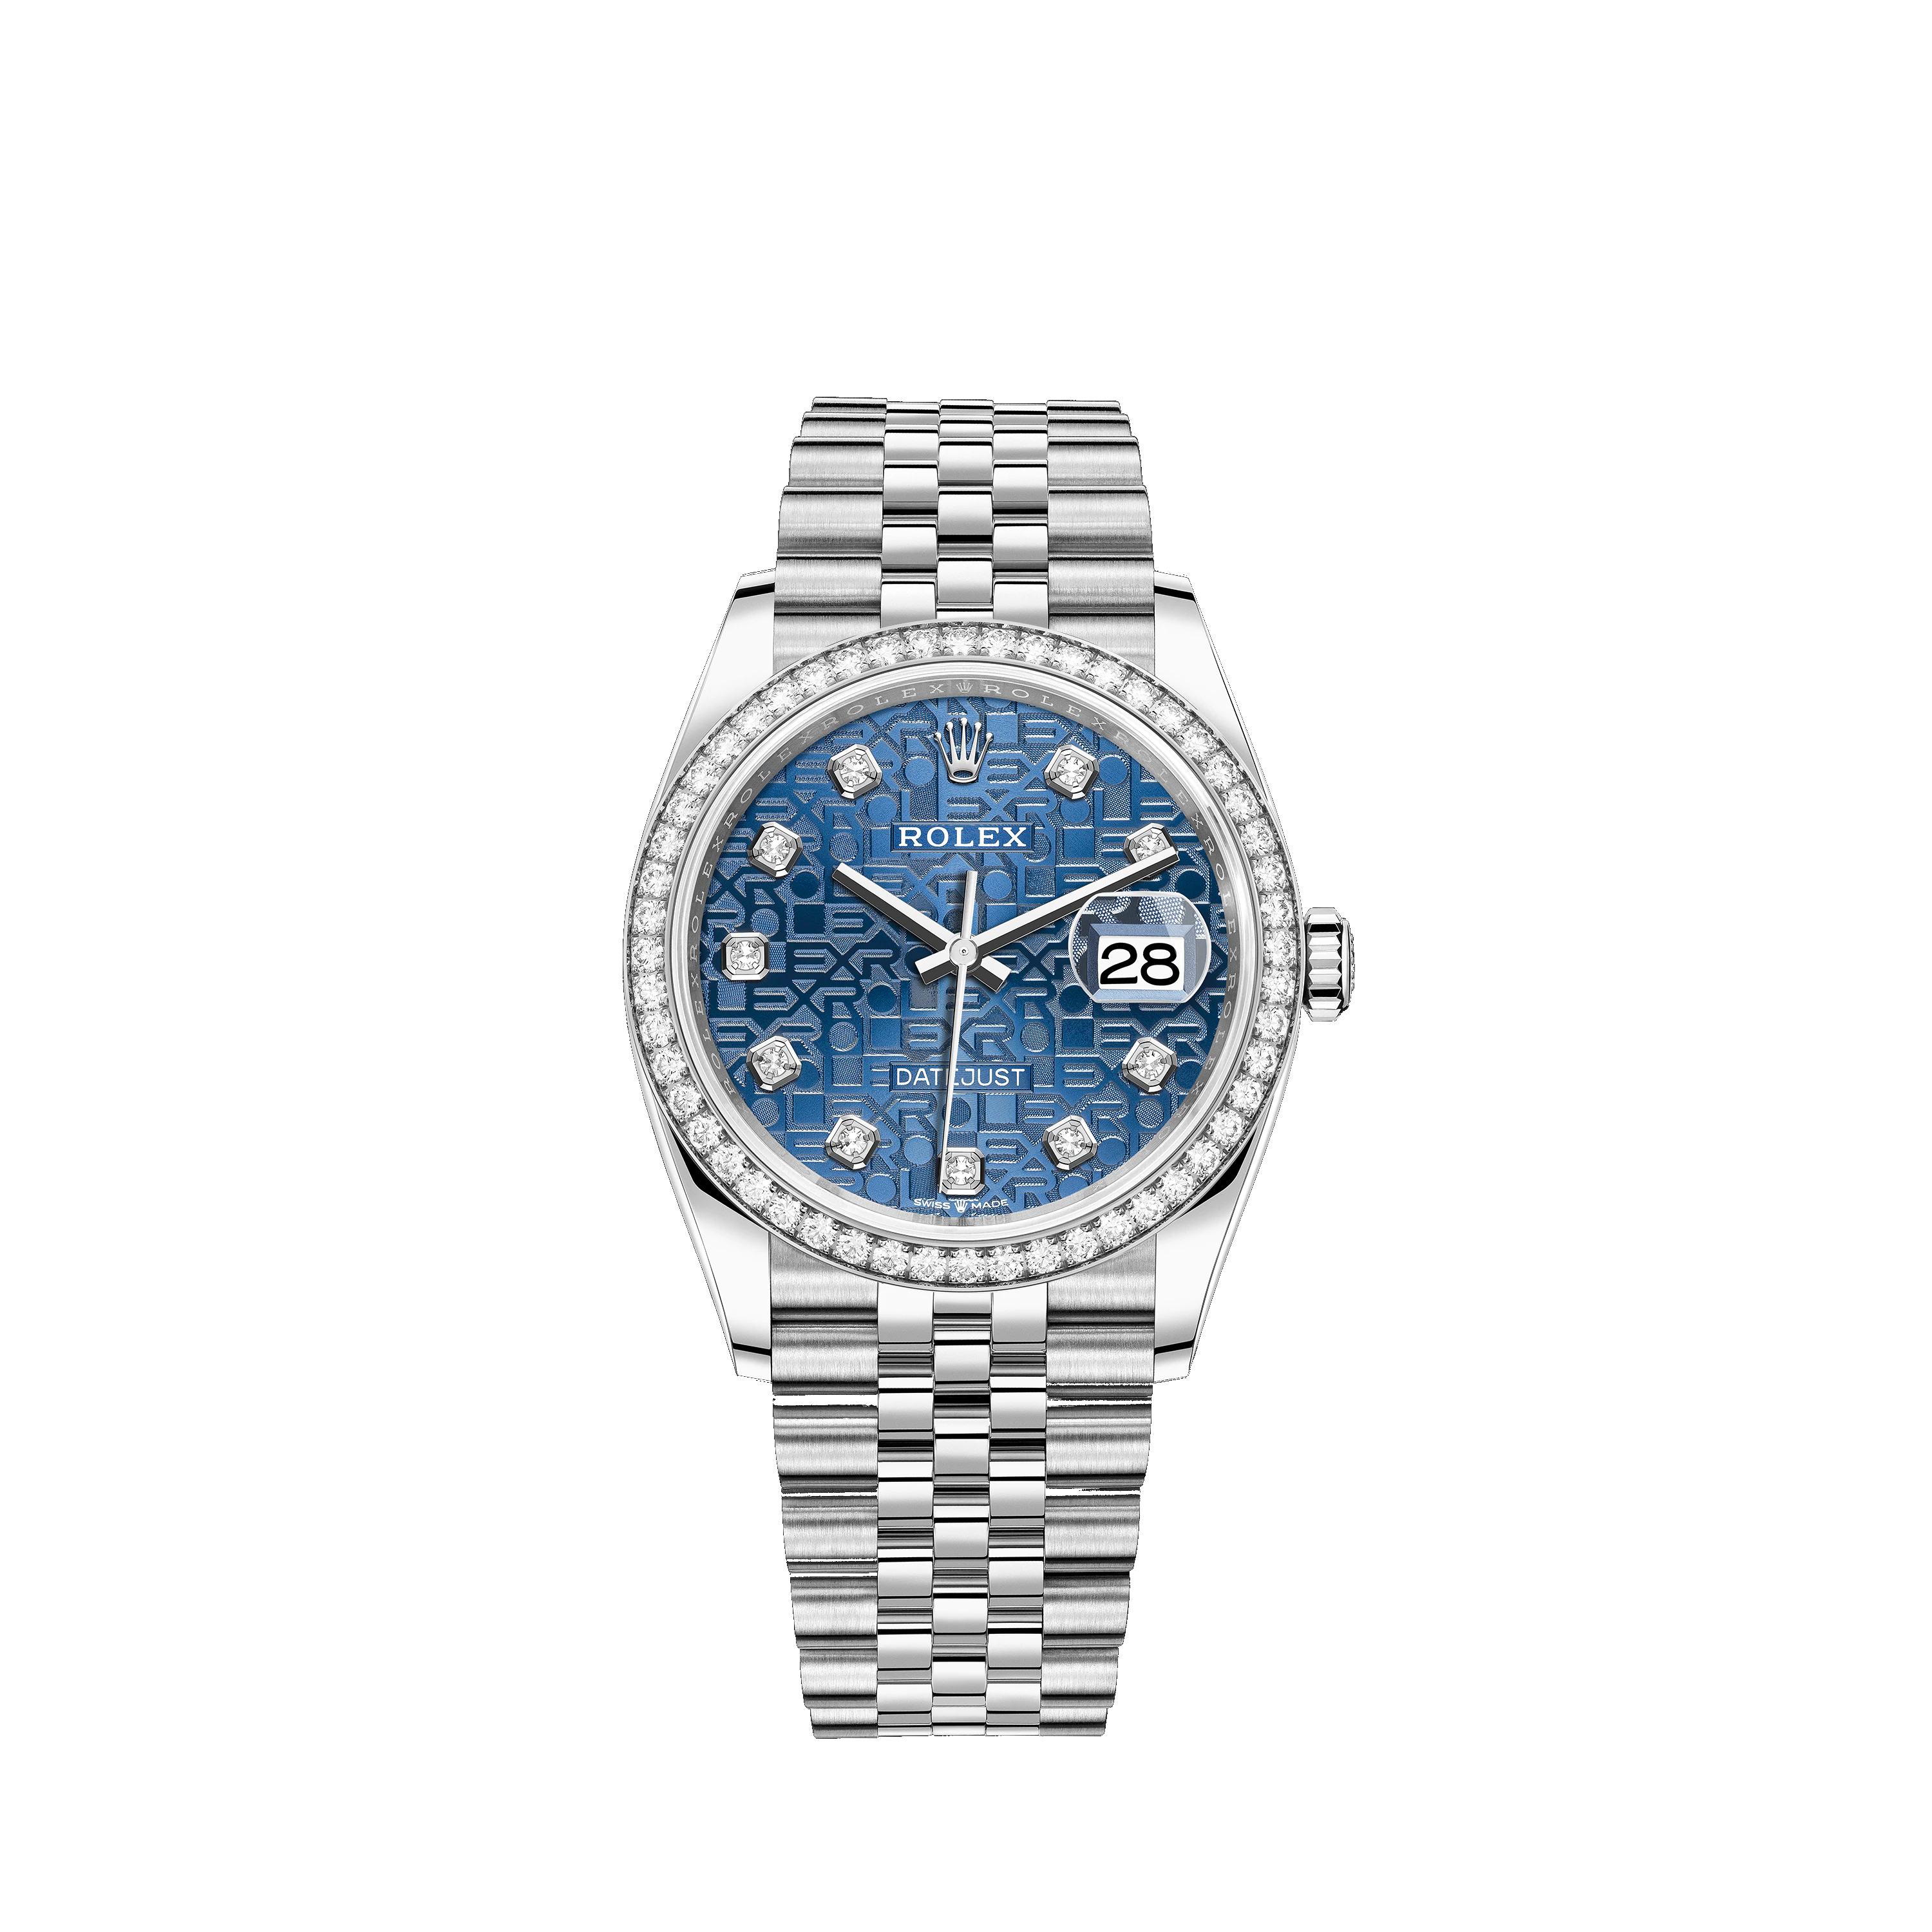 Datejust 36 126284RBR White Gold, Stainless Steel & Diamonds Watch (Blue Jubilee Design Set with Diamonds)